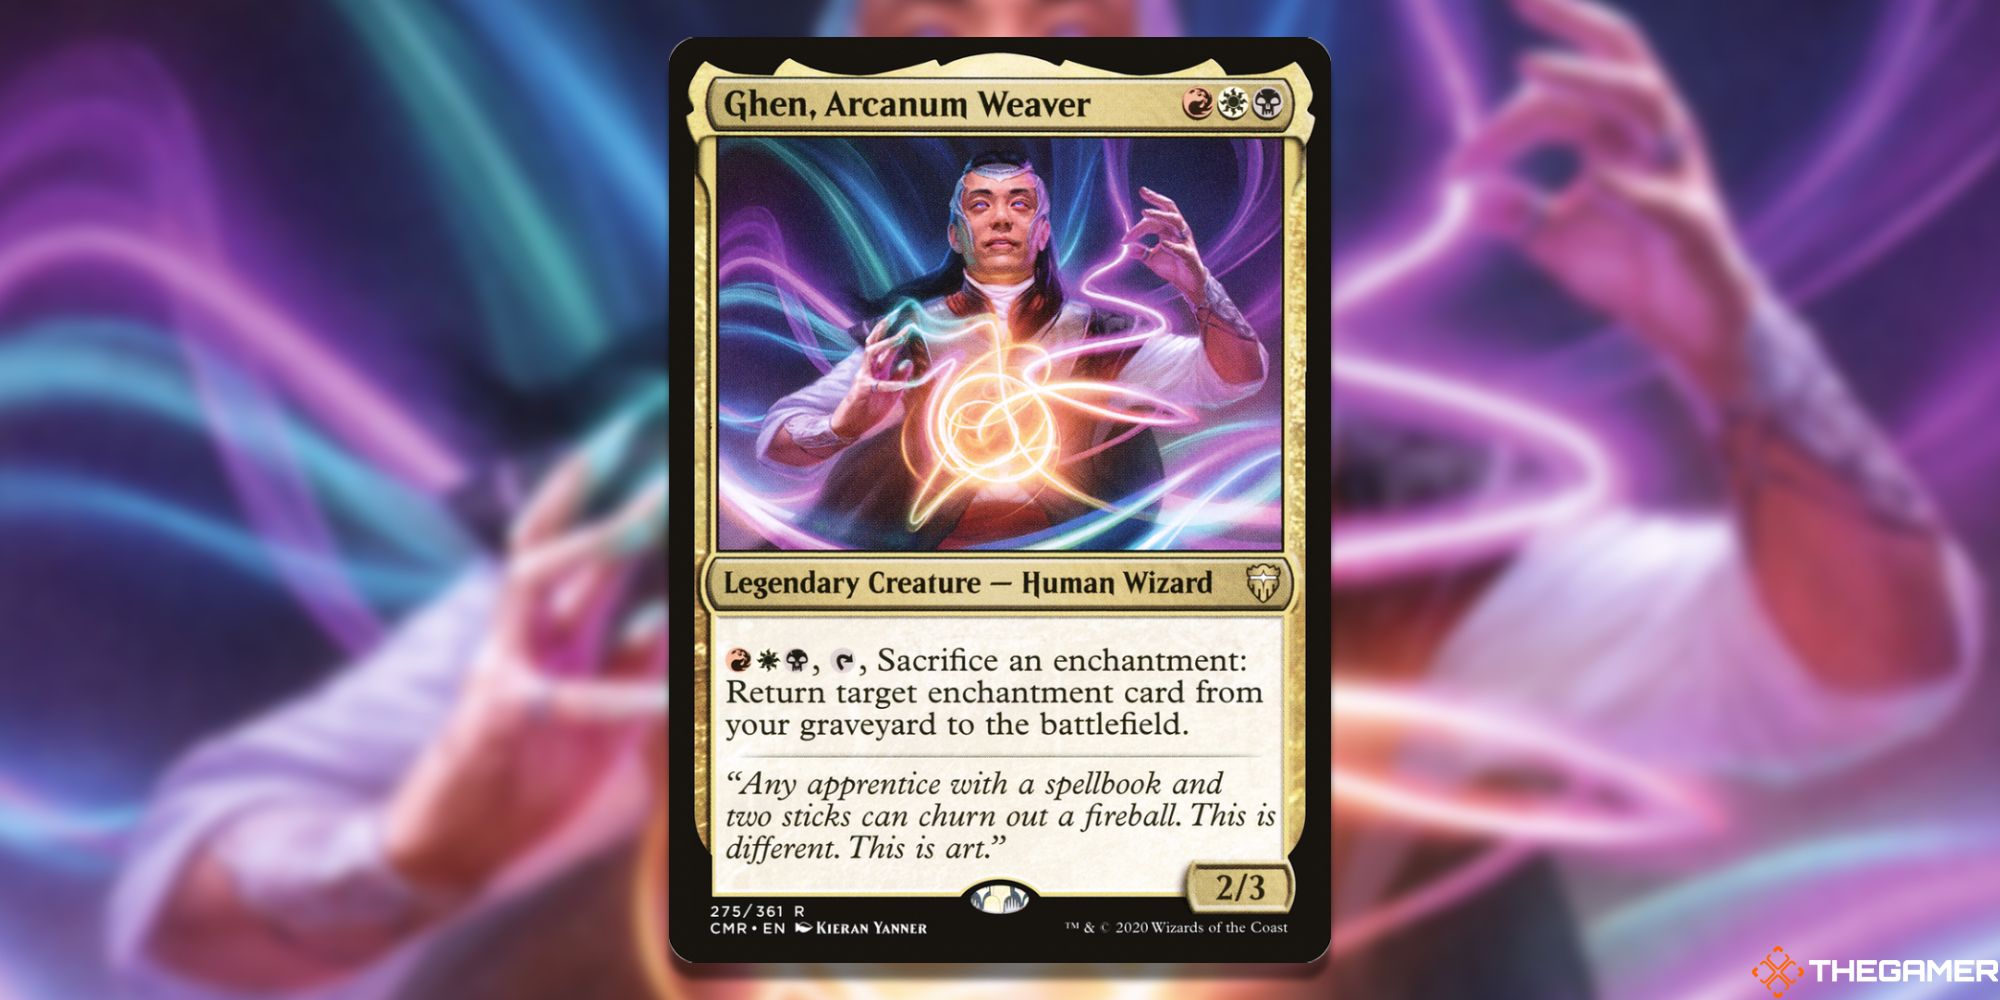 Image of the Ghen, Arcanum Weaver card in Magic: The Gathering, with art by Kieran Yanner